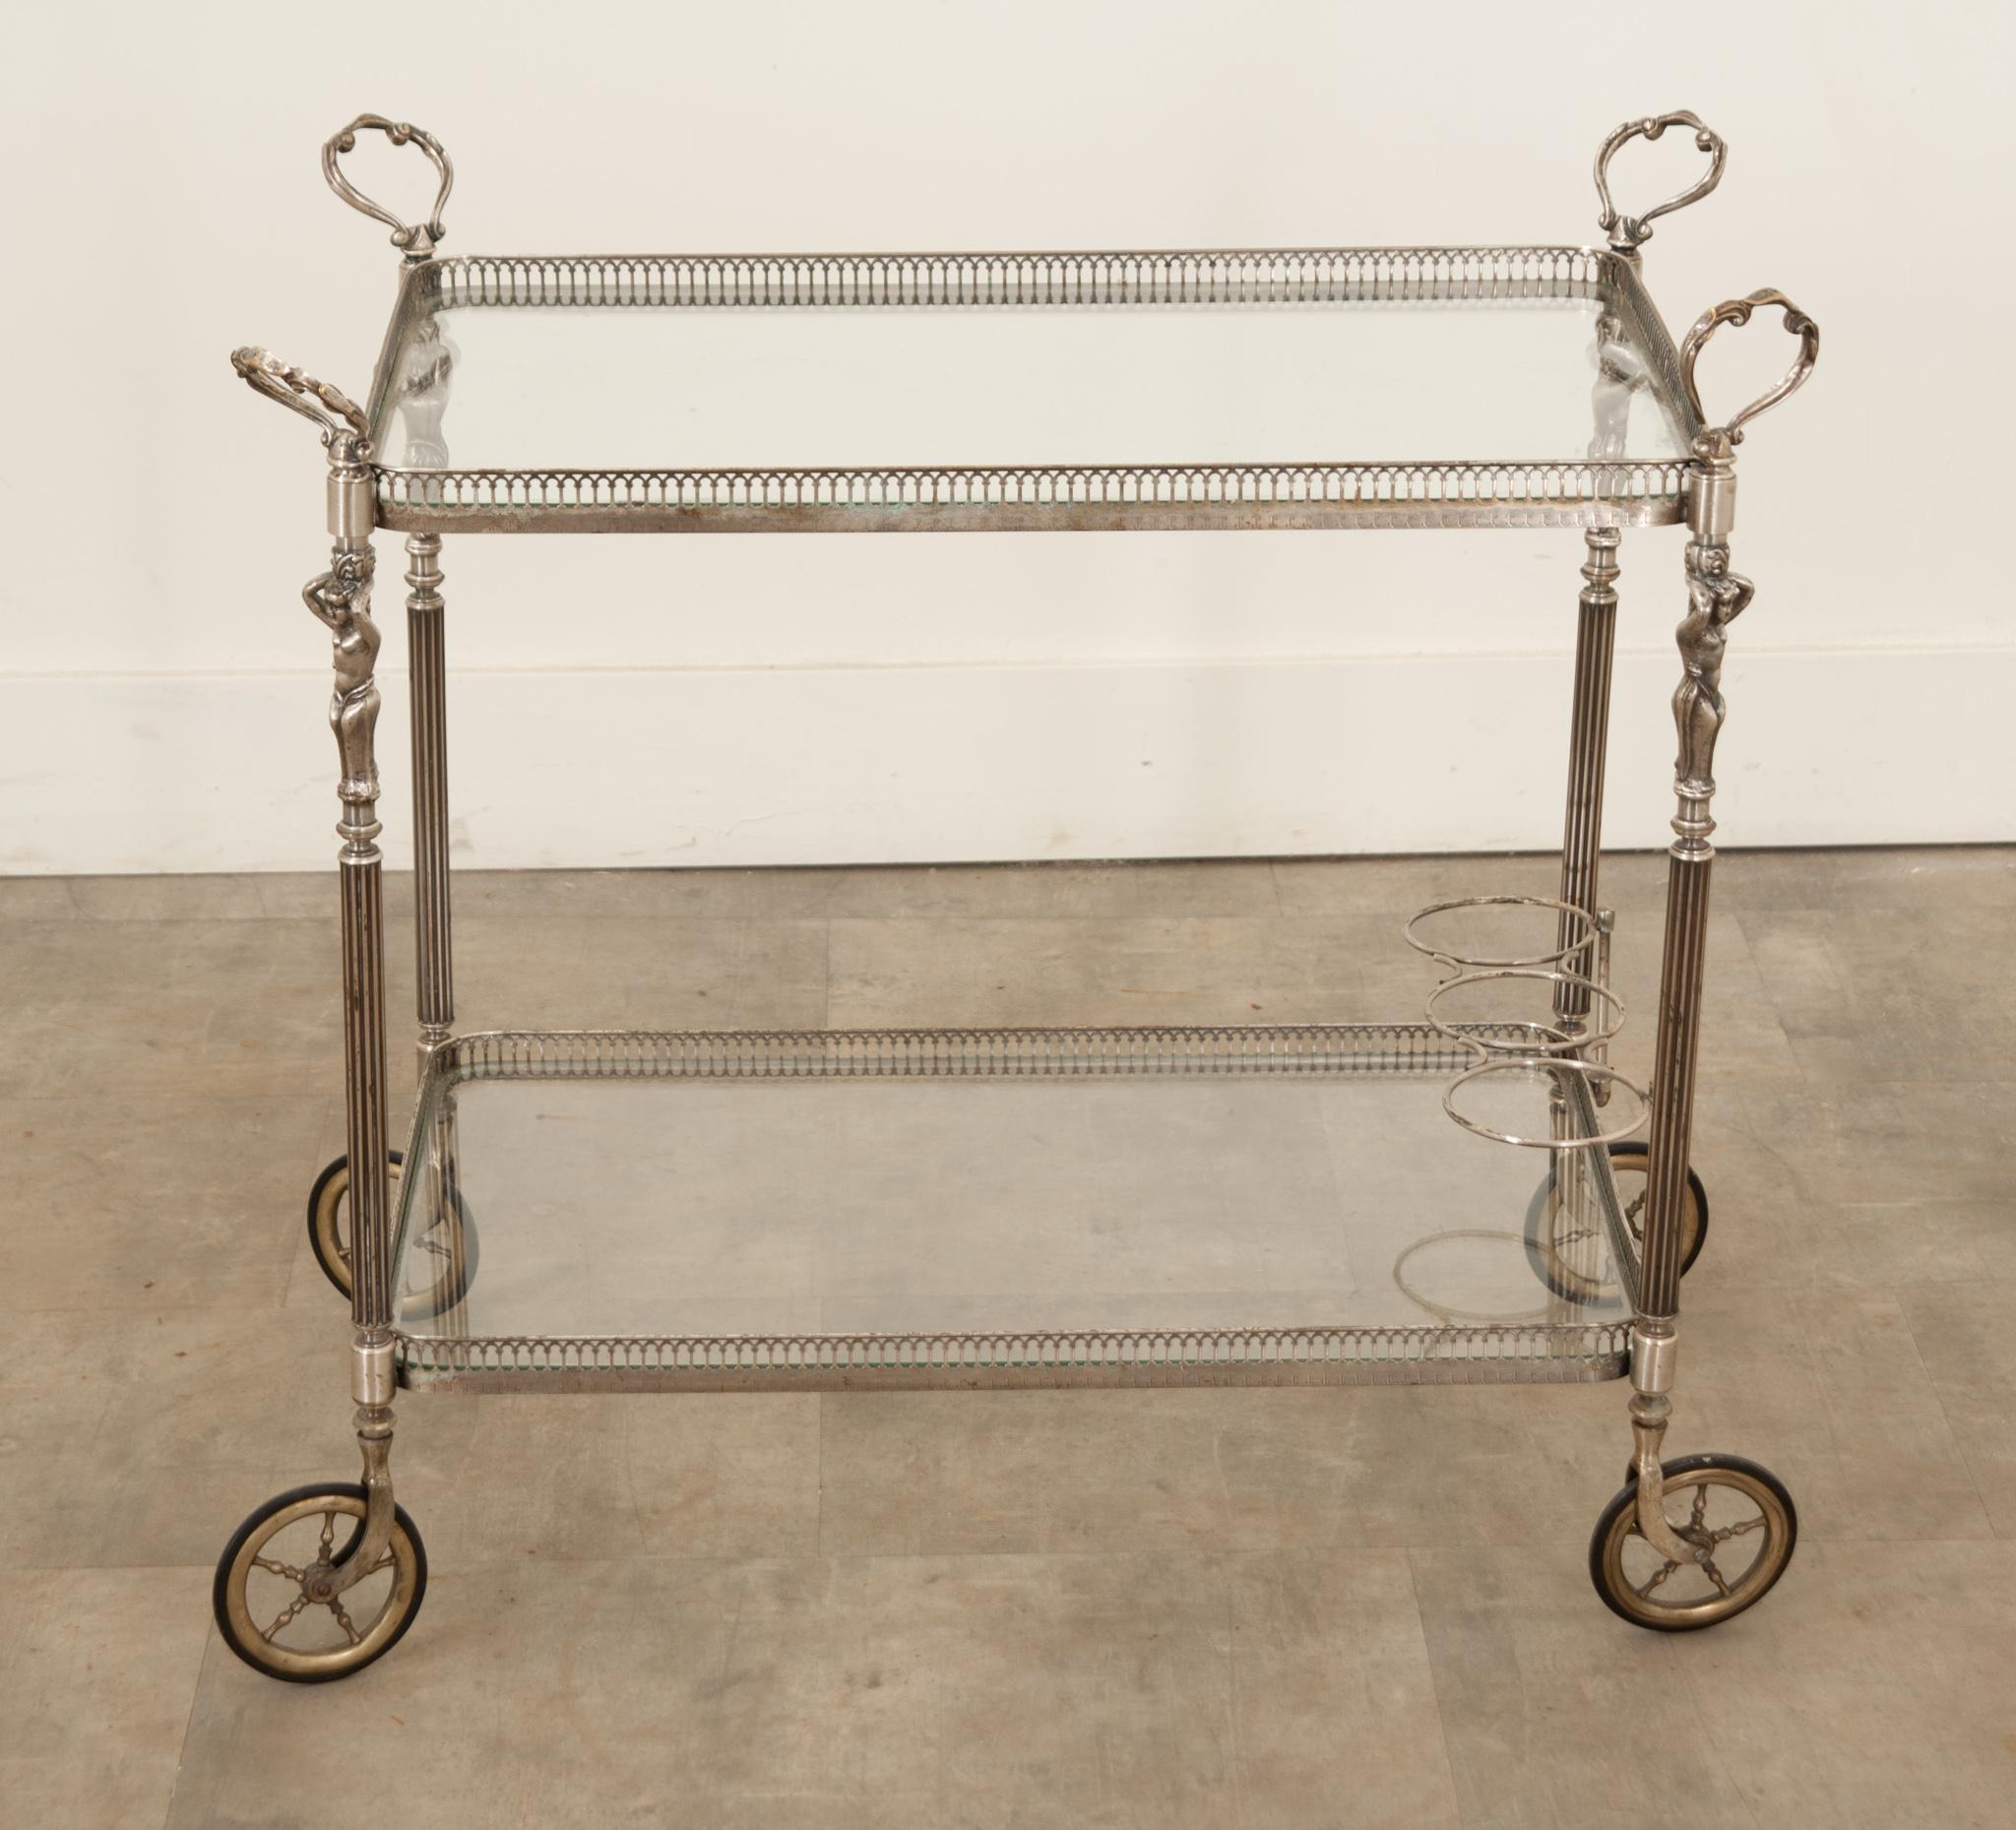 A fabulous French metal bar cart with a silver finish that was hand-crafted in France circa 1900 during the Art Nouveau period. This exquisite trolley is made of metal and contains its original glass. It features a gallery top, four original castors